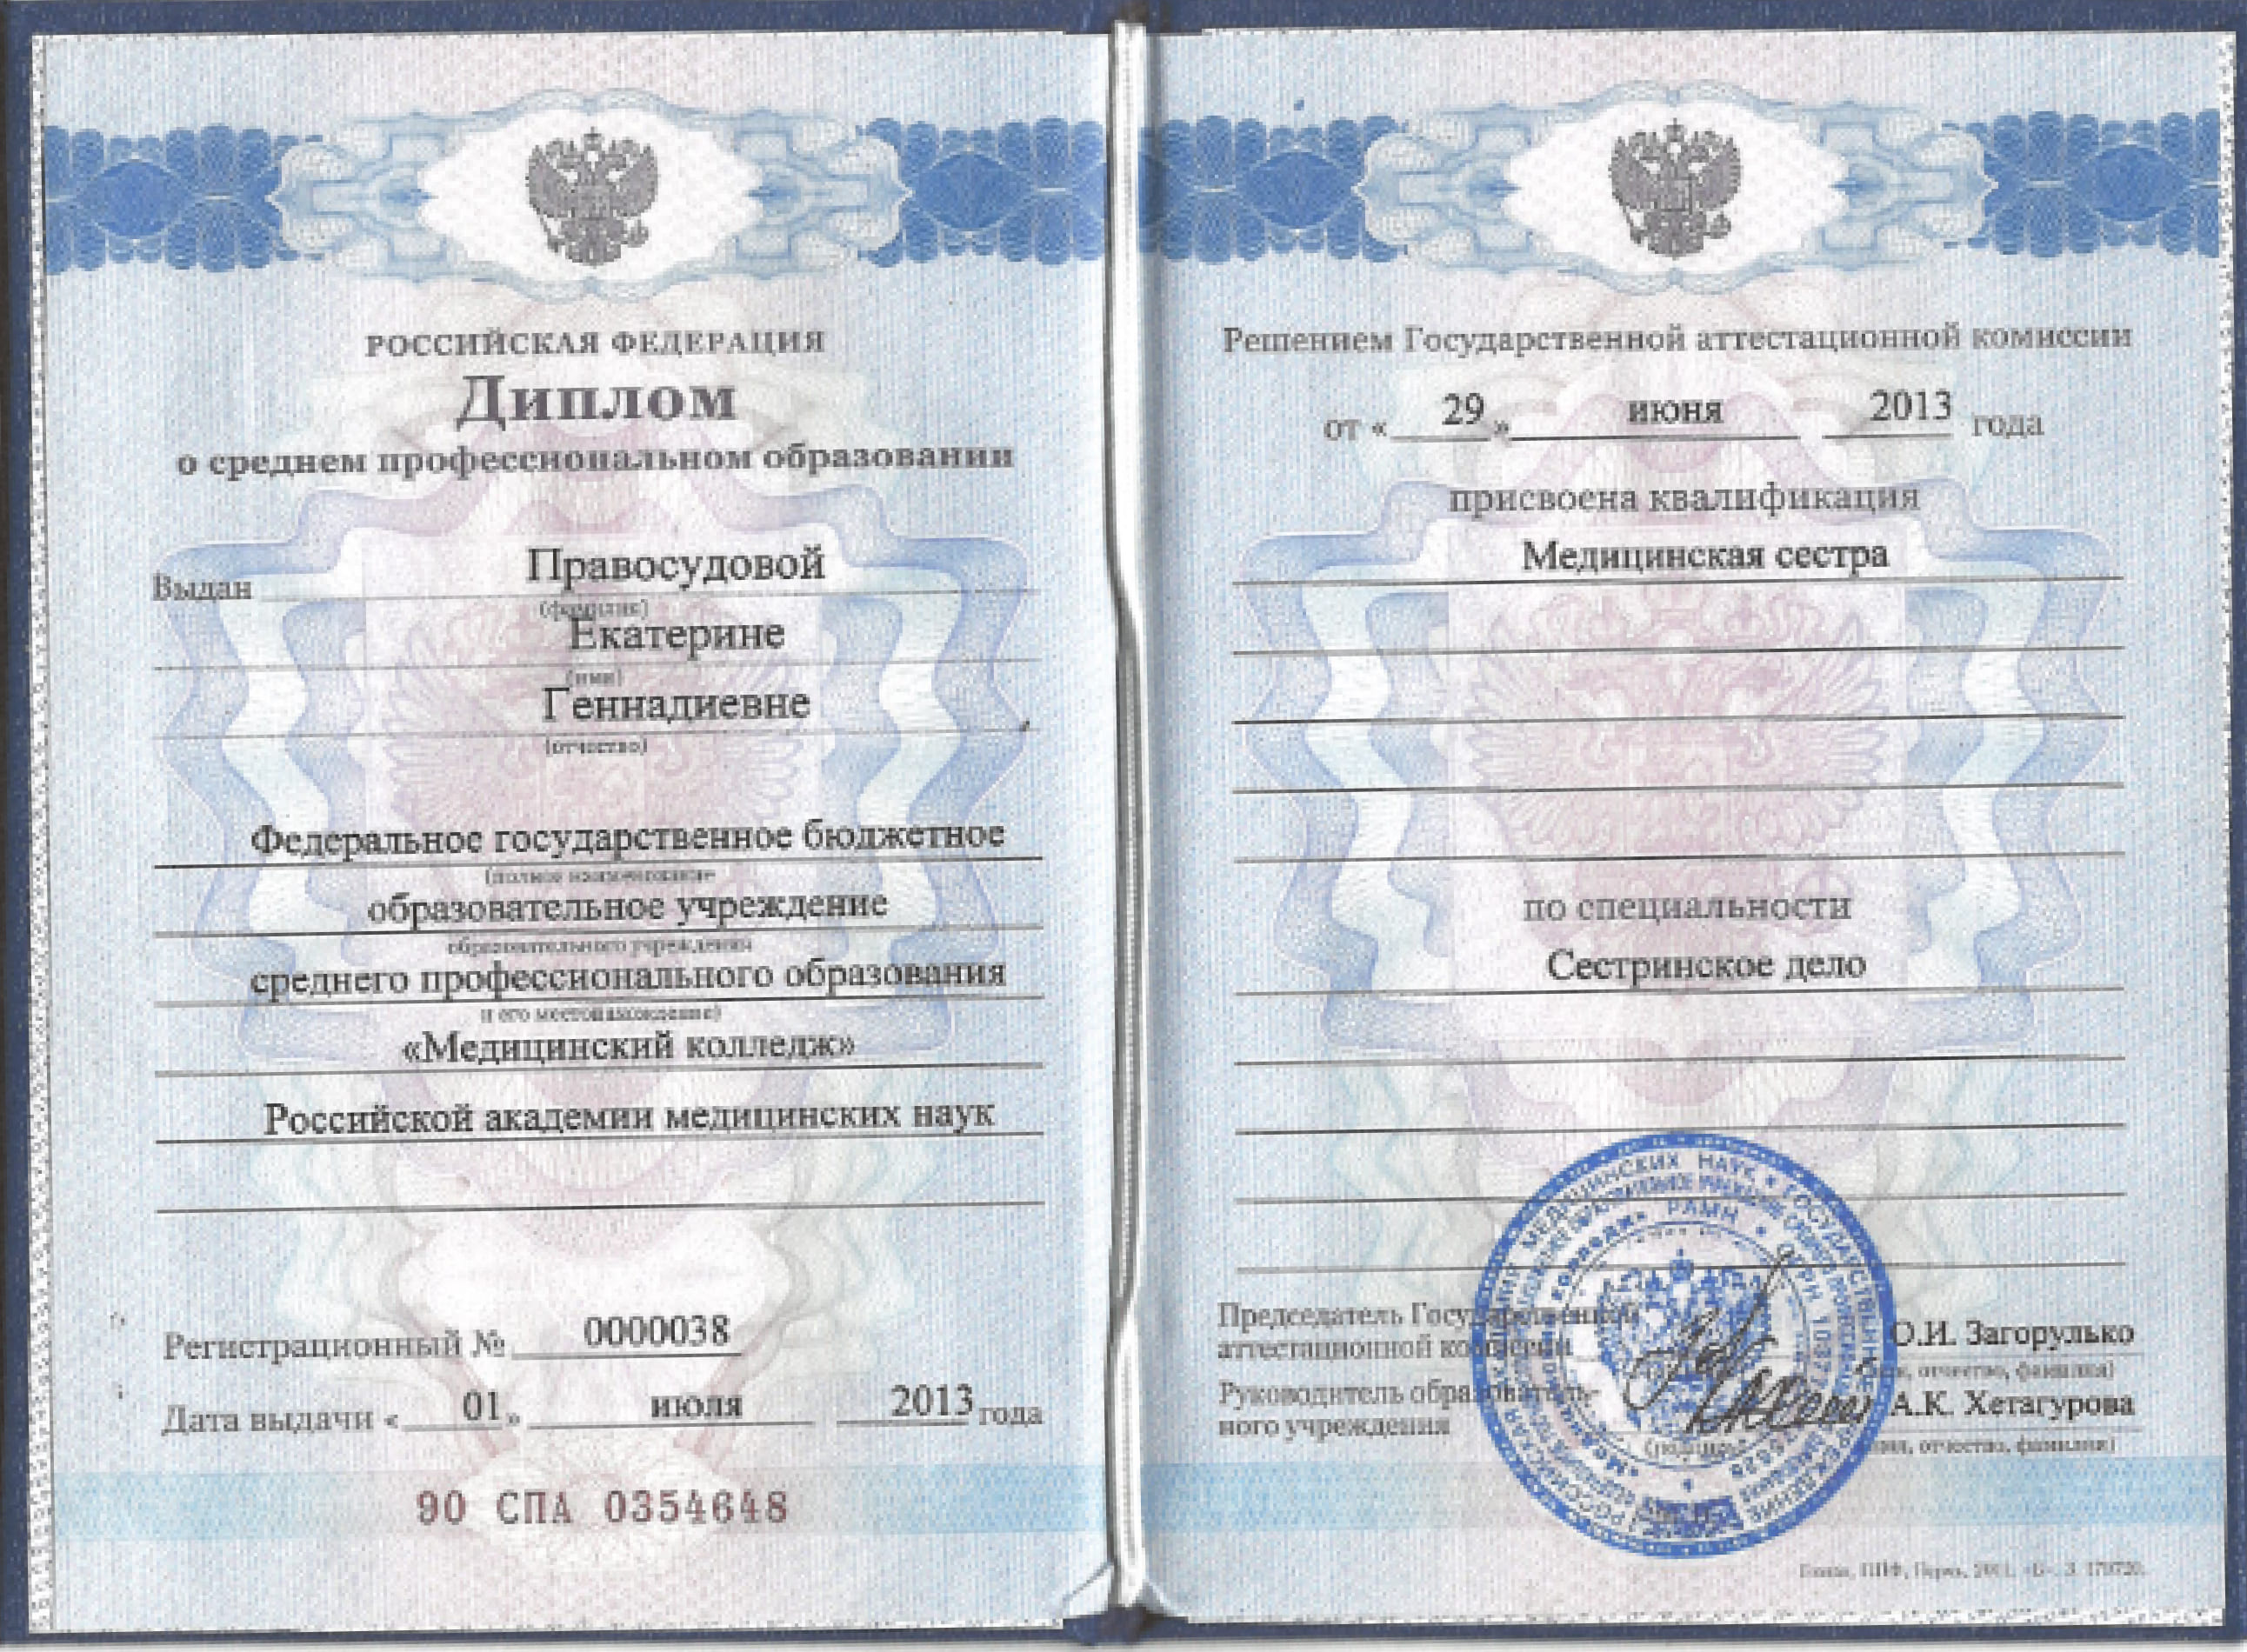 Diploma of Secondary Vocational Education